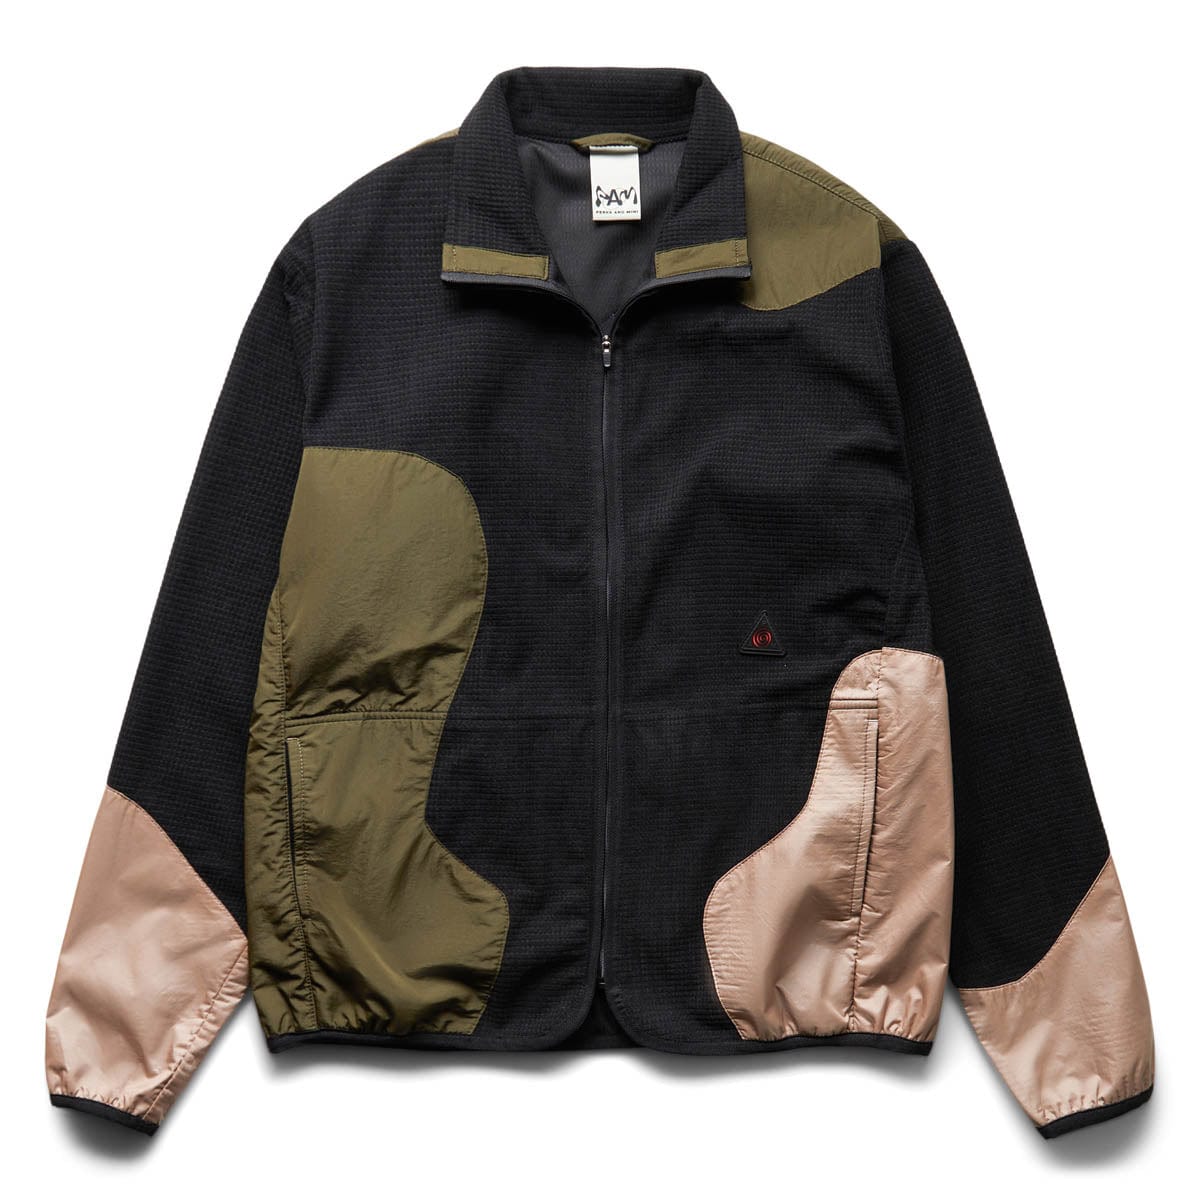 Perks and Mini Outerwear PATCHED FLEECE JACKET